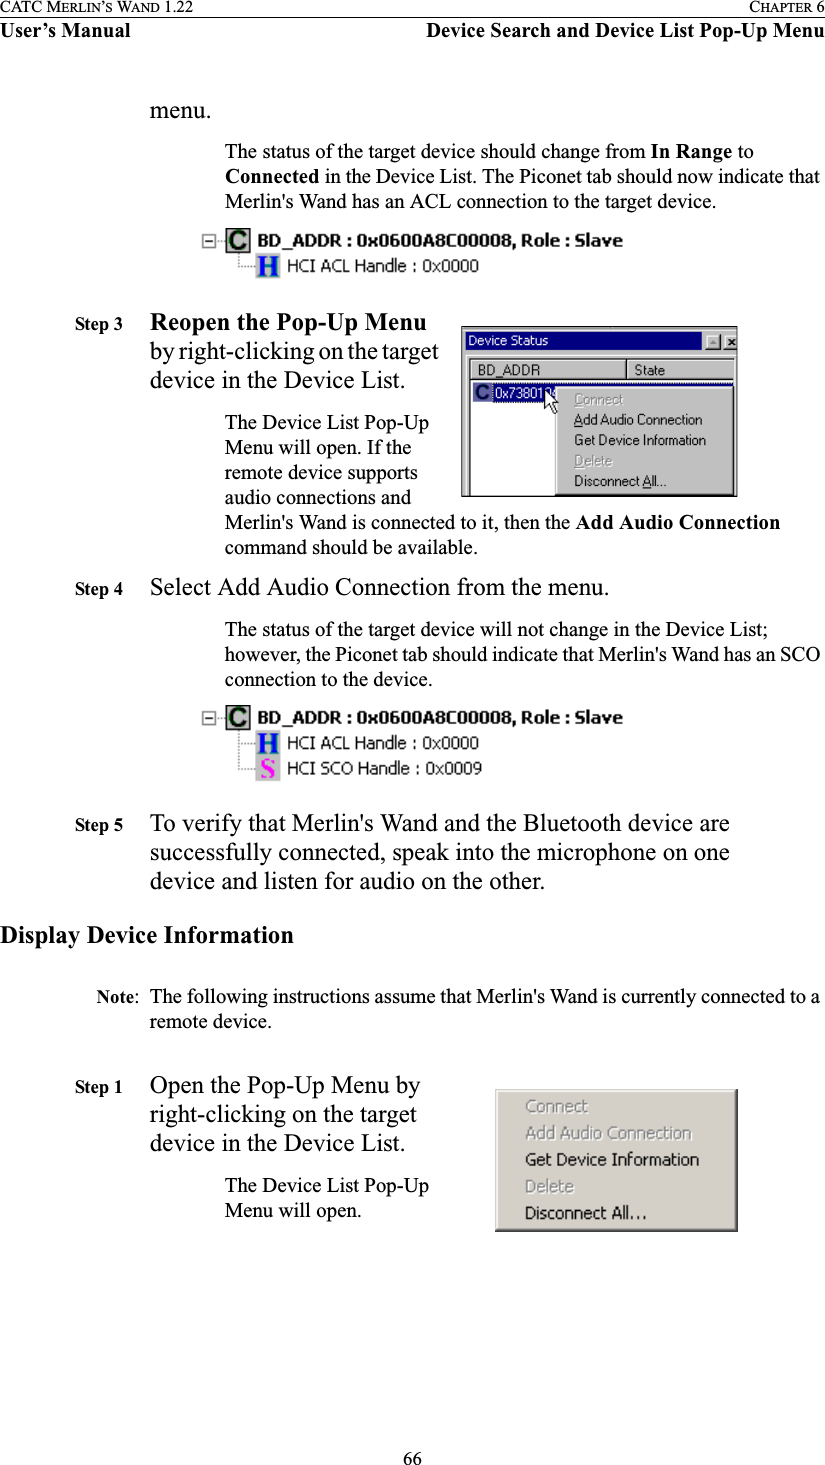 66CATC MERLIN’S WAND 1.22 CHAPTER 6User’s Manual Device Search and Device List Pop-Up Menumenu.The status of the target device should change from In Range to Connected in the Device List. The Piconet tab should now indicate that Merlin&apos;s Wand has an ACL connection to the target device.Step 3 Reopen the Pop-Up Menu by right-clicking on the target device in the Device List.The Device List Pop-Up Menu will open. If the remote device supports audio connections and Merlin&apos;s Wand is connected to it, then the Add Audio Connection command should be available.Step 4 Select Add Audio Connection from the menu.The status of the target device will not change in the Device List; however, the Piconet tab should indicate that Merlin&apos;s Wand has an SCO connection to the device.Step 5 To verify that Merlin&apos;s Wand and the Bluetooth device are successfully connected, speak into the microphone on one device and listen for audio on the other.Display Device InformationNote: The following instructions assume that Merlin&apos;s Wand is currently connected to a remote device.Step 1 Open the Pop-Up Menu by right-clicking on the target device in the Device List.The Device List Pop-Up Menu will open.